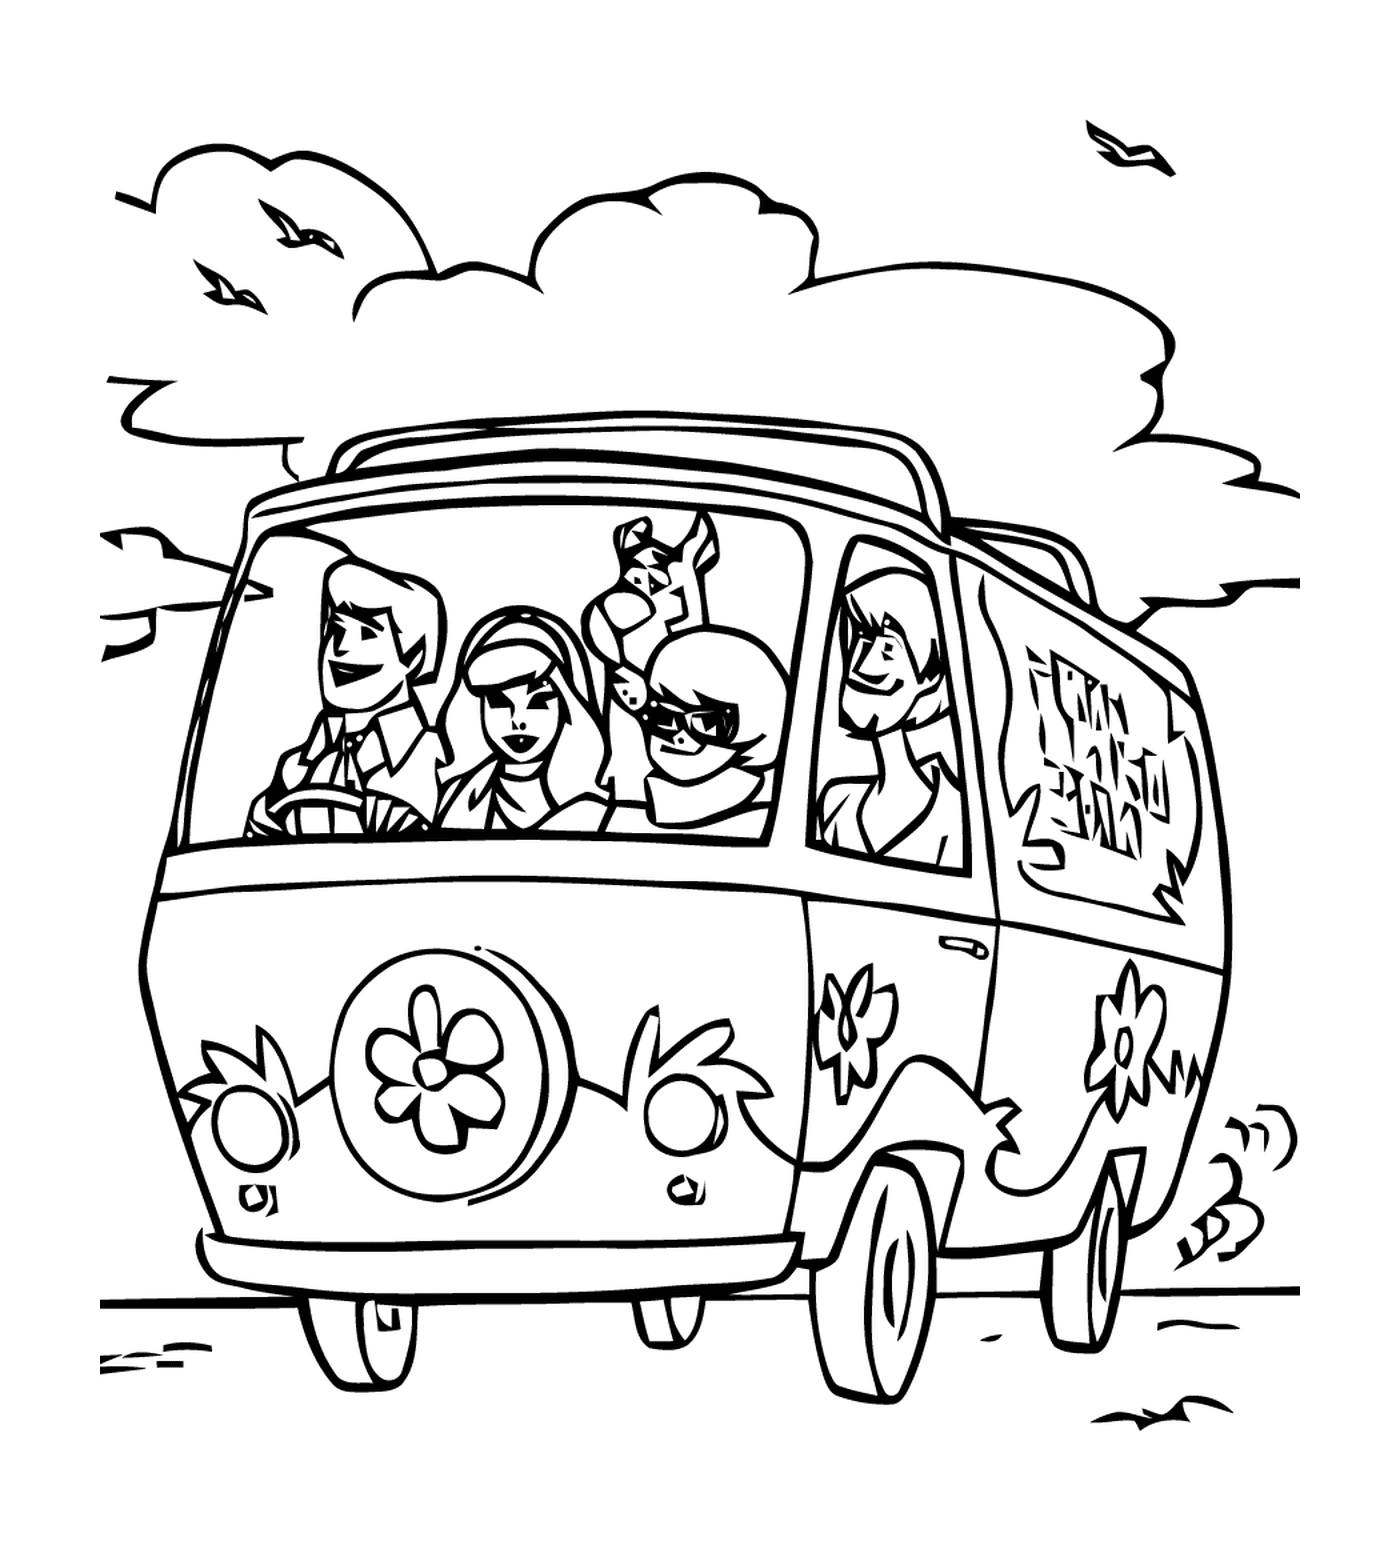  A group of people in a car on the road 